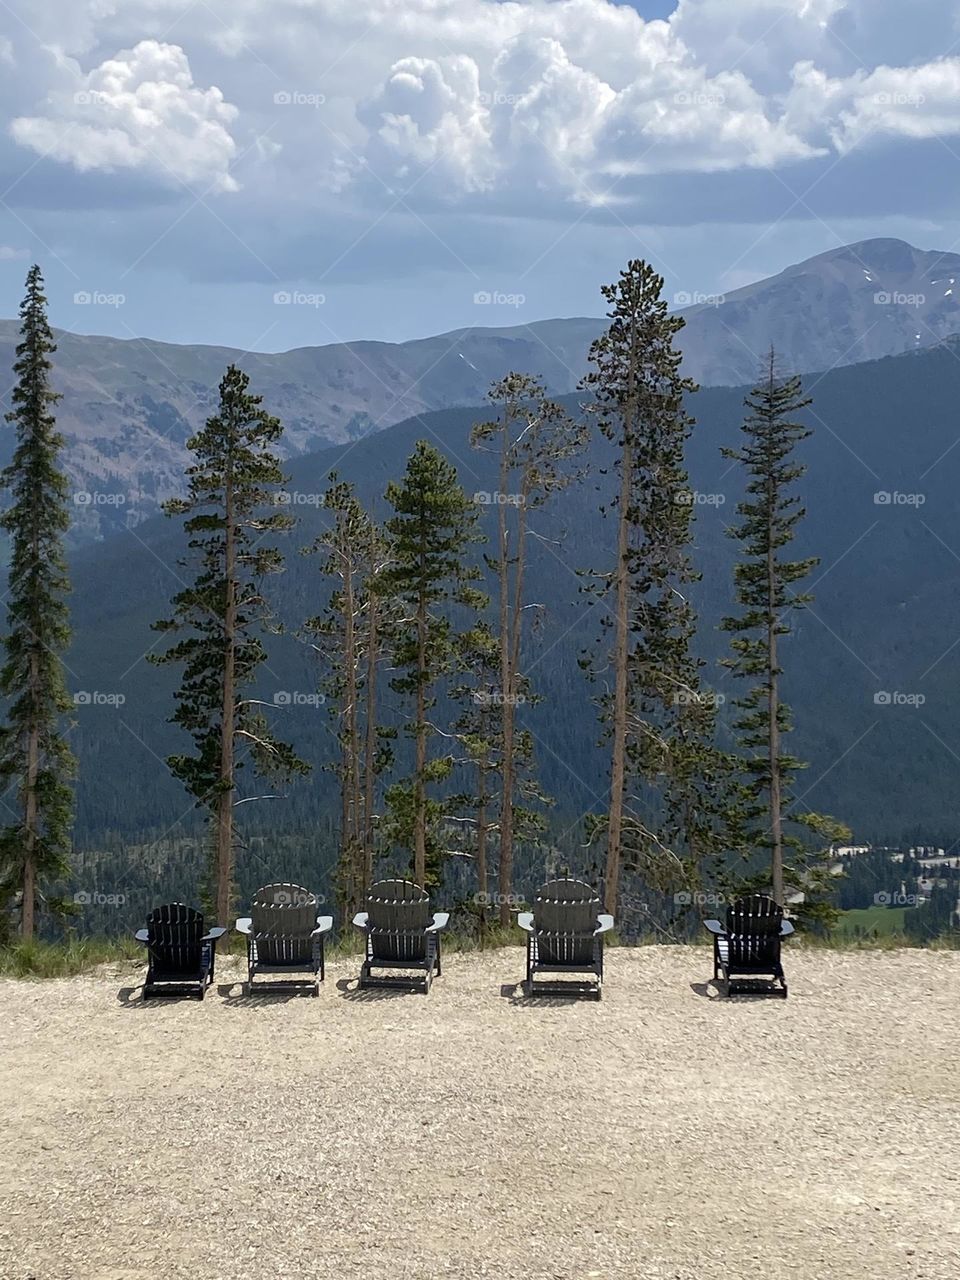 Five chairs on a mountain overlooking pine trees and other mountain peeks. 